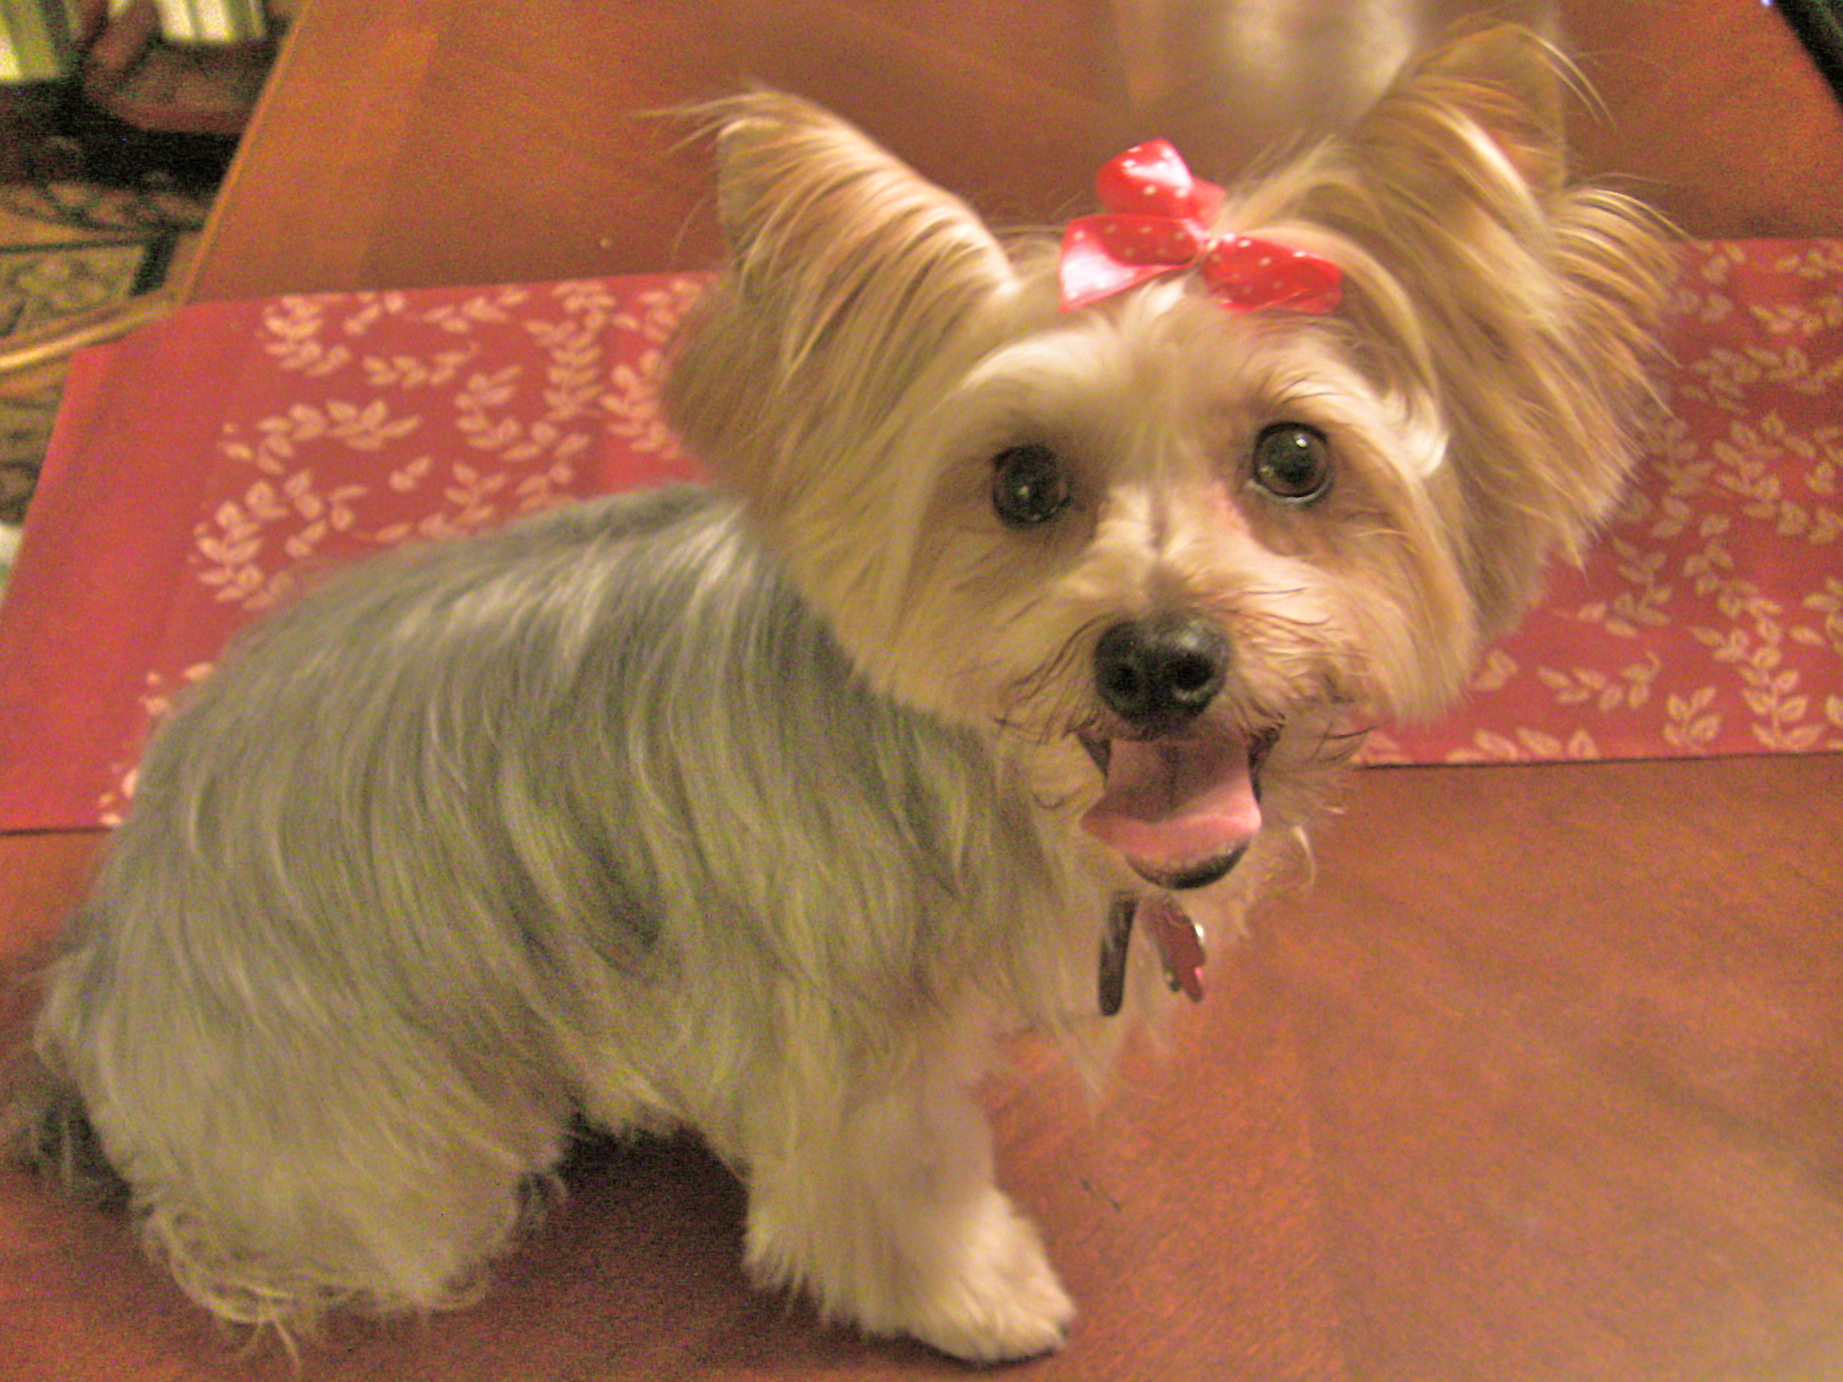 Tiffy the Yorkie is Back from the Groomer and Looking Fabulous!